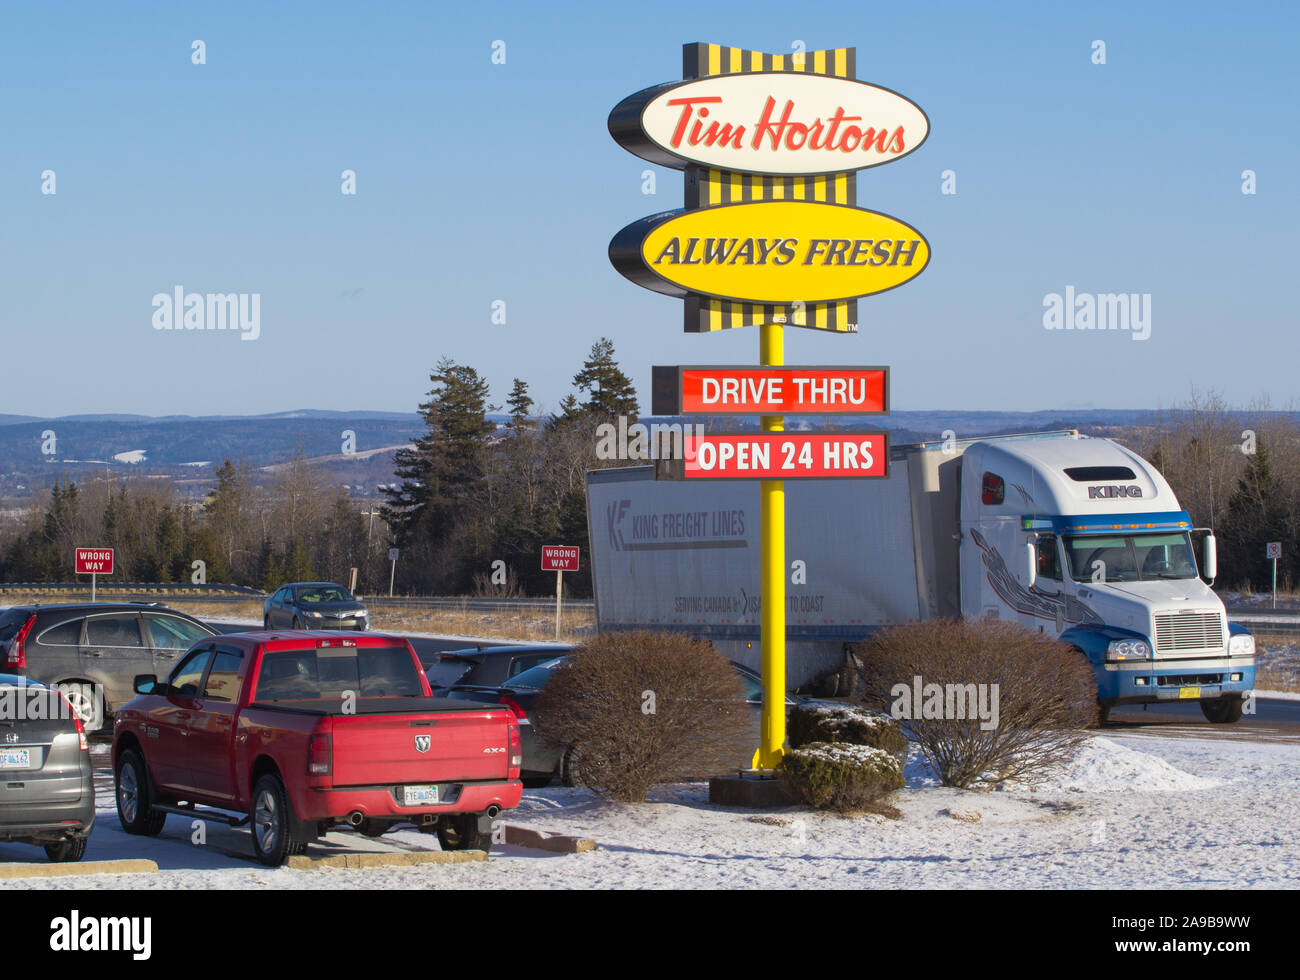 Truro, Canada - February 09, 2018: Tim Hortons sign beside highway 102, Nova Scotia. Tim Hortons is a Canadian restaurant chain known for its coffee a Stock Photo